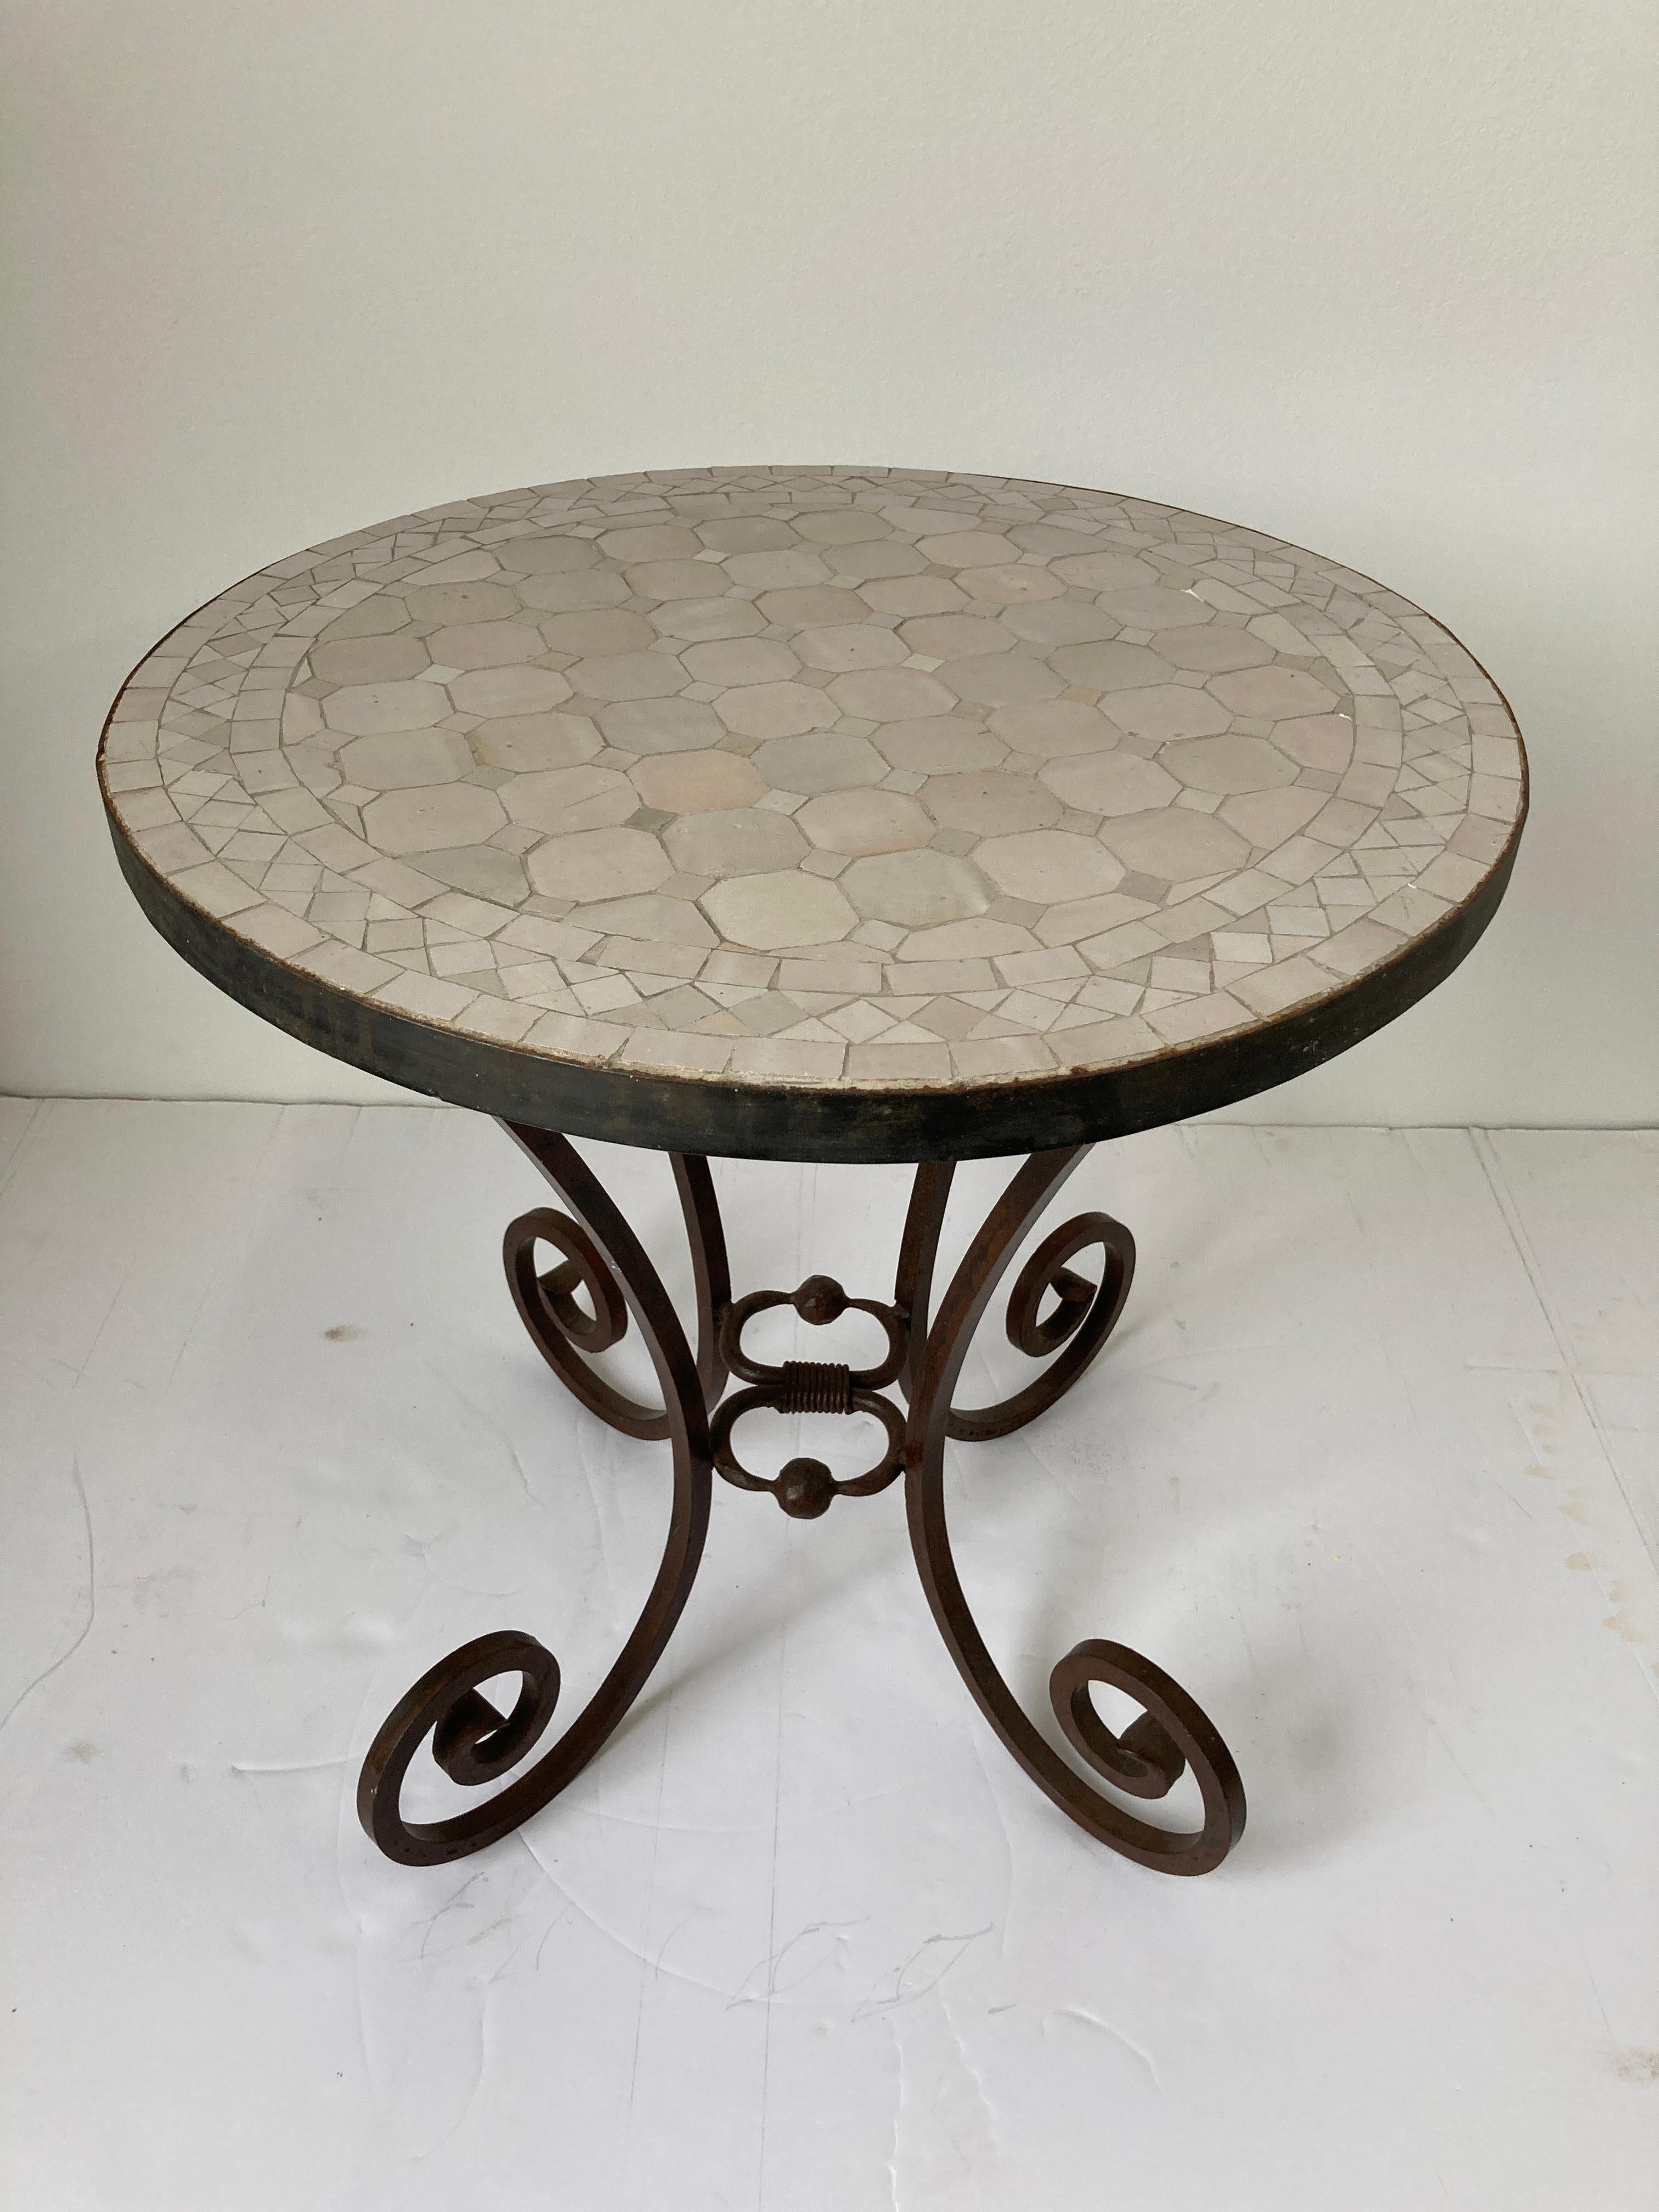 Moroccan mosaic tile side table on iron base.
Colors are ivory, off white, beige.
Handmade by expert artisans in Fez, Morocco using reclaimed old glazed teal color tiles inlaid in concrete using reclaimed old glazed tiles and making beautiful